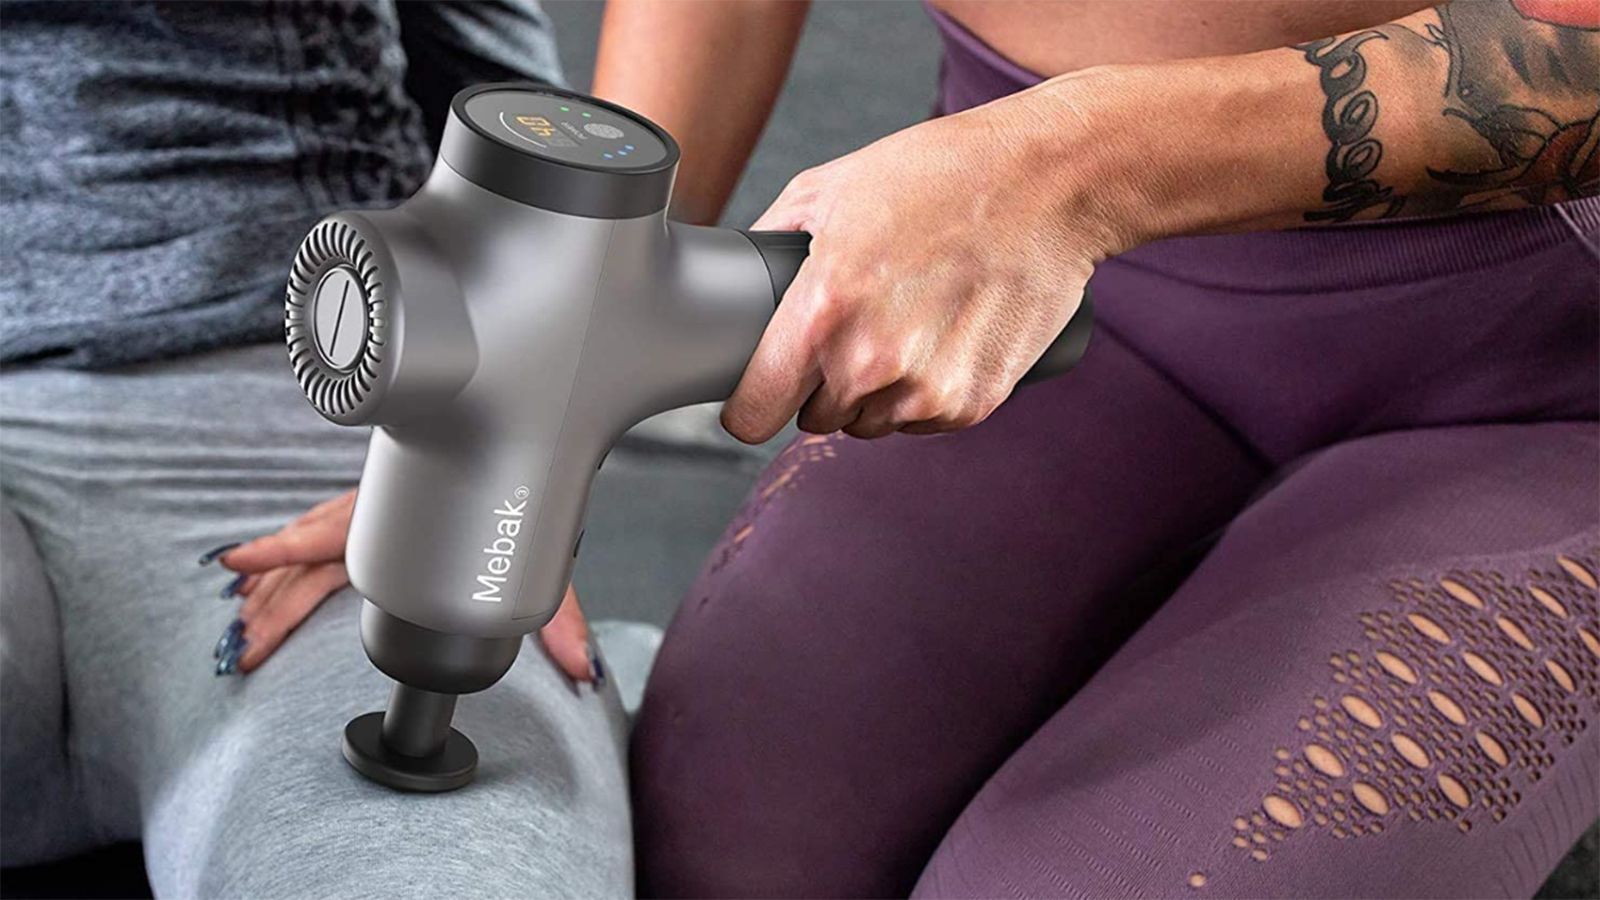 Father's Day gift idea: Save 28% on this 'phenomenal' back massager